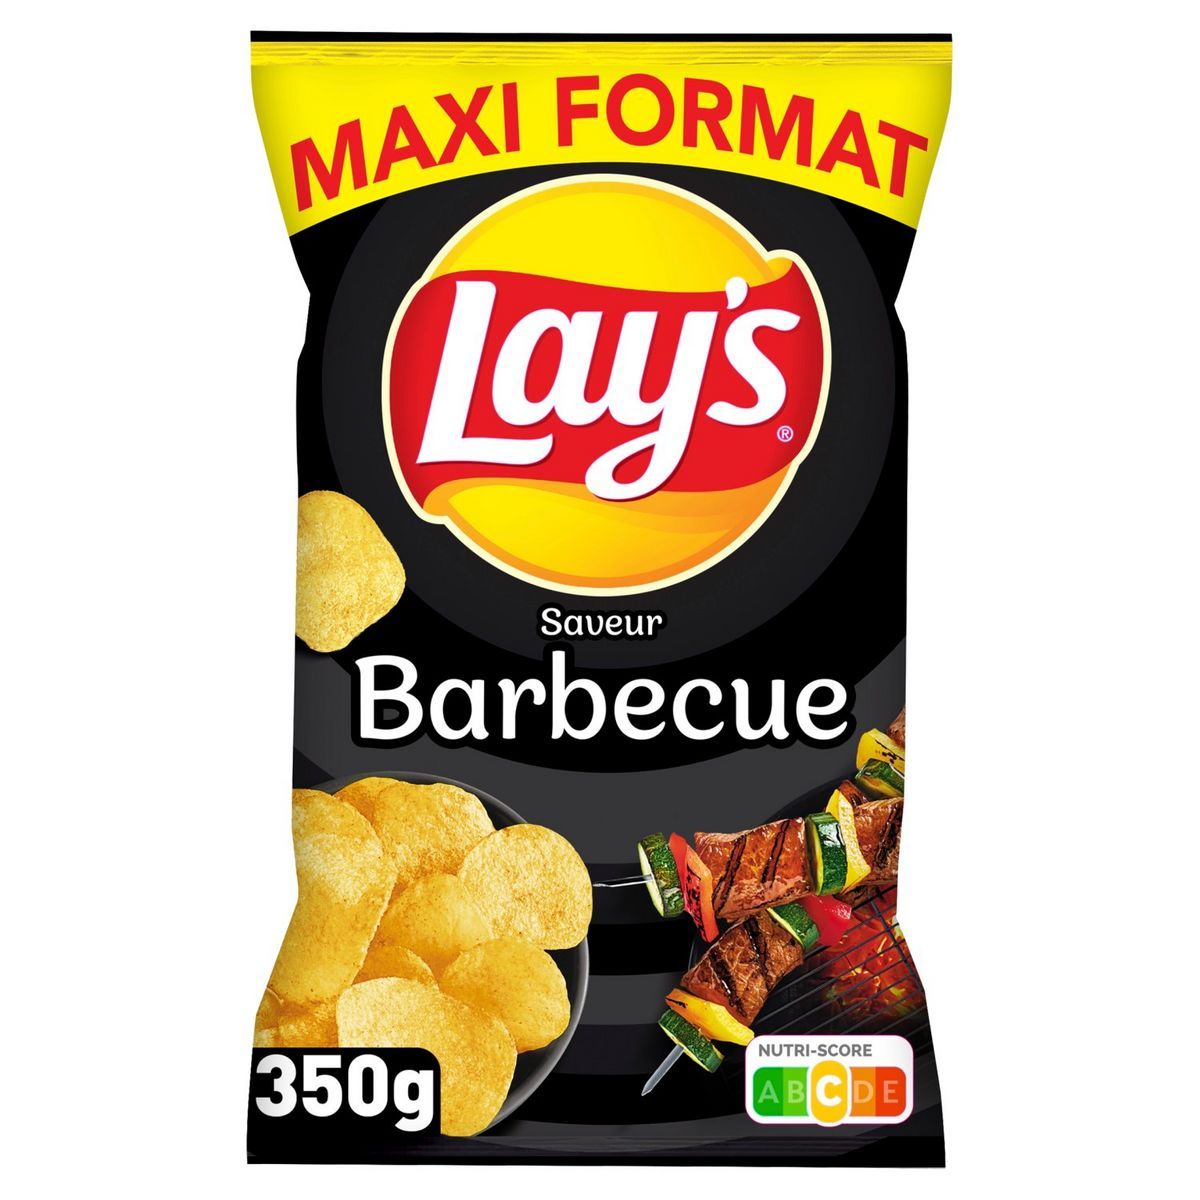 CHIPS SAVEUR BARBECUE MACI FORMAT LAY'S